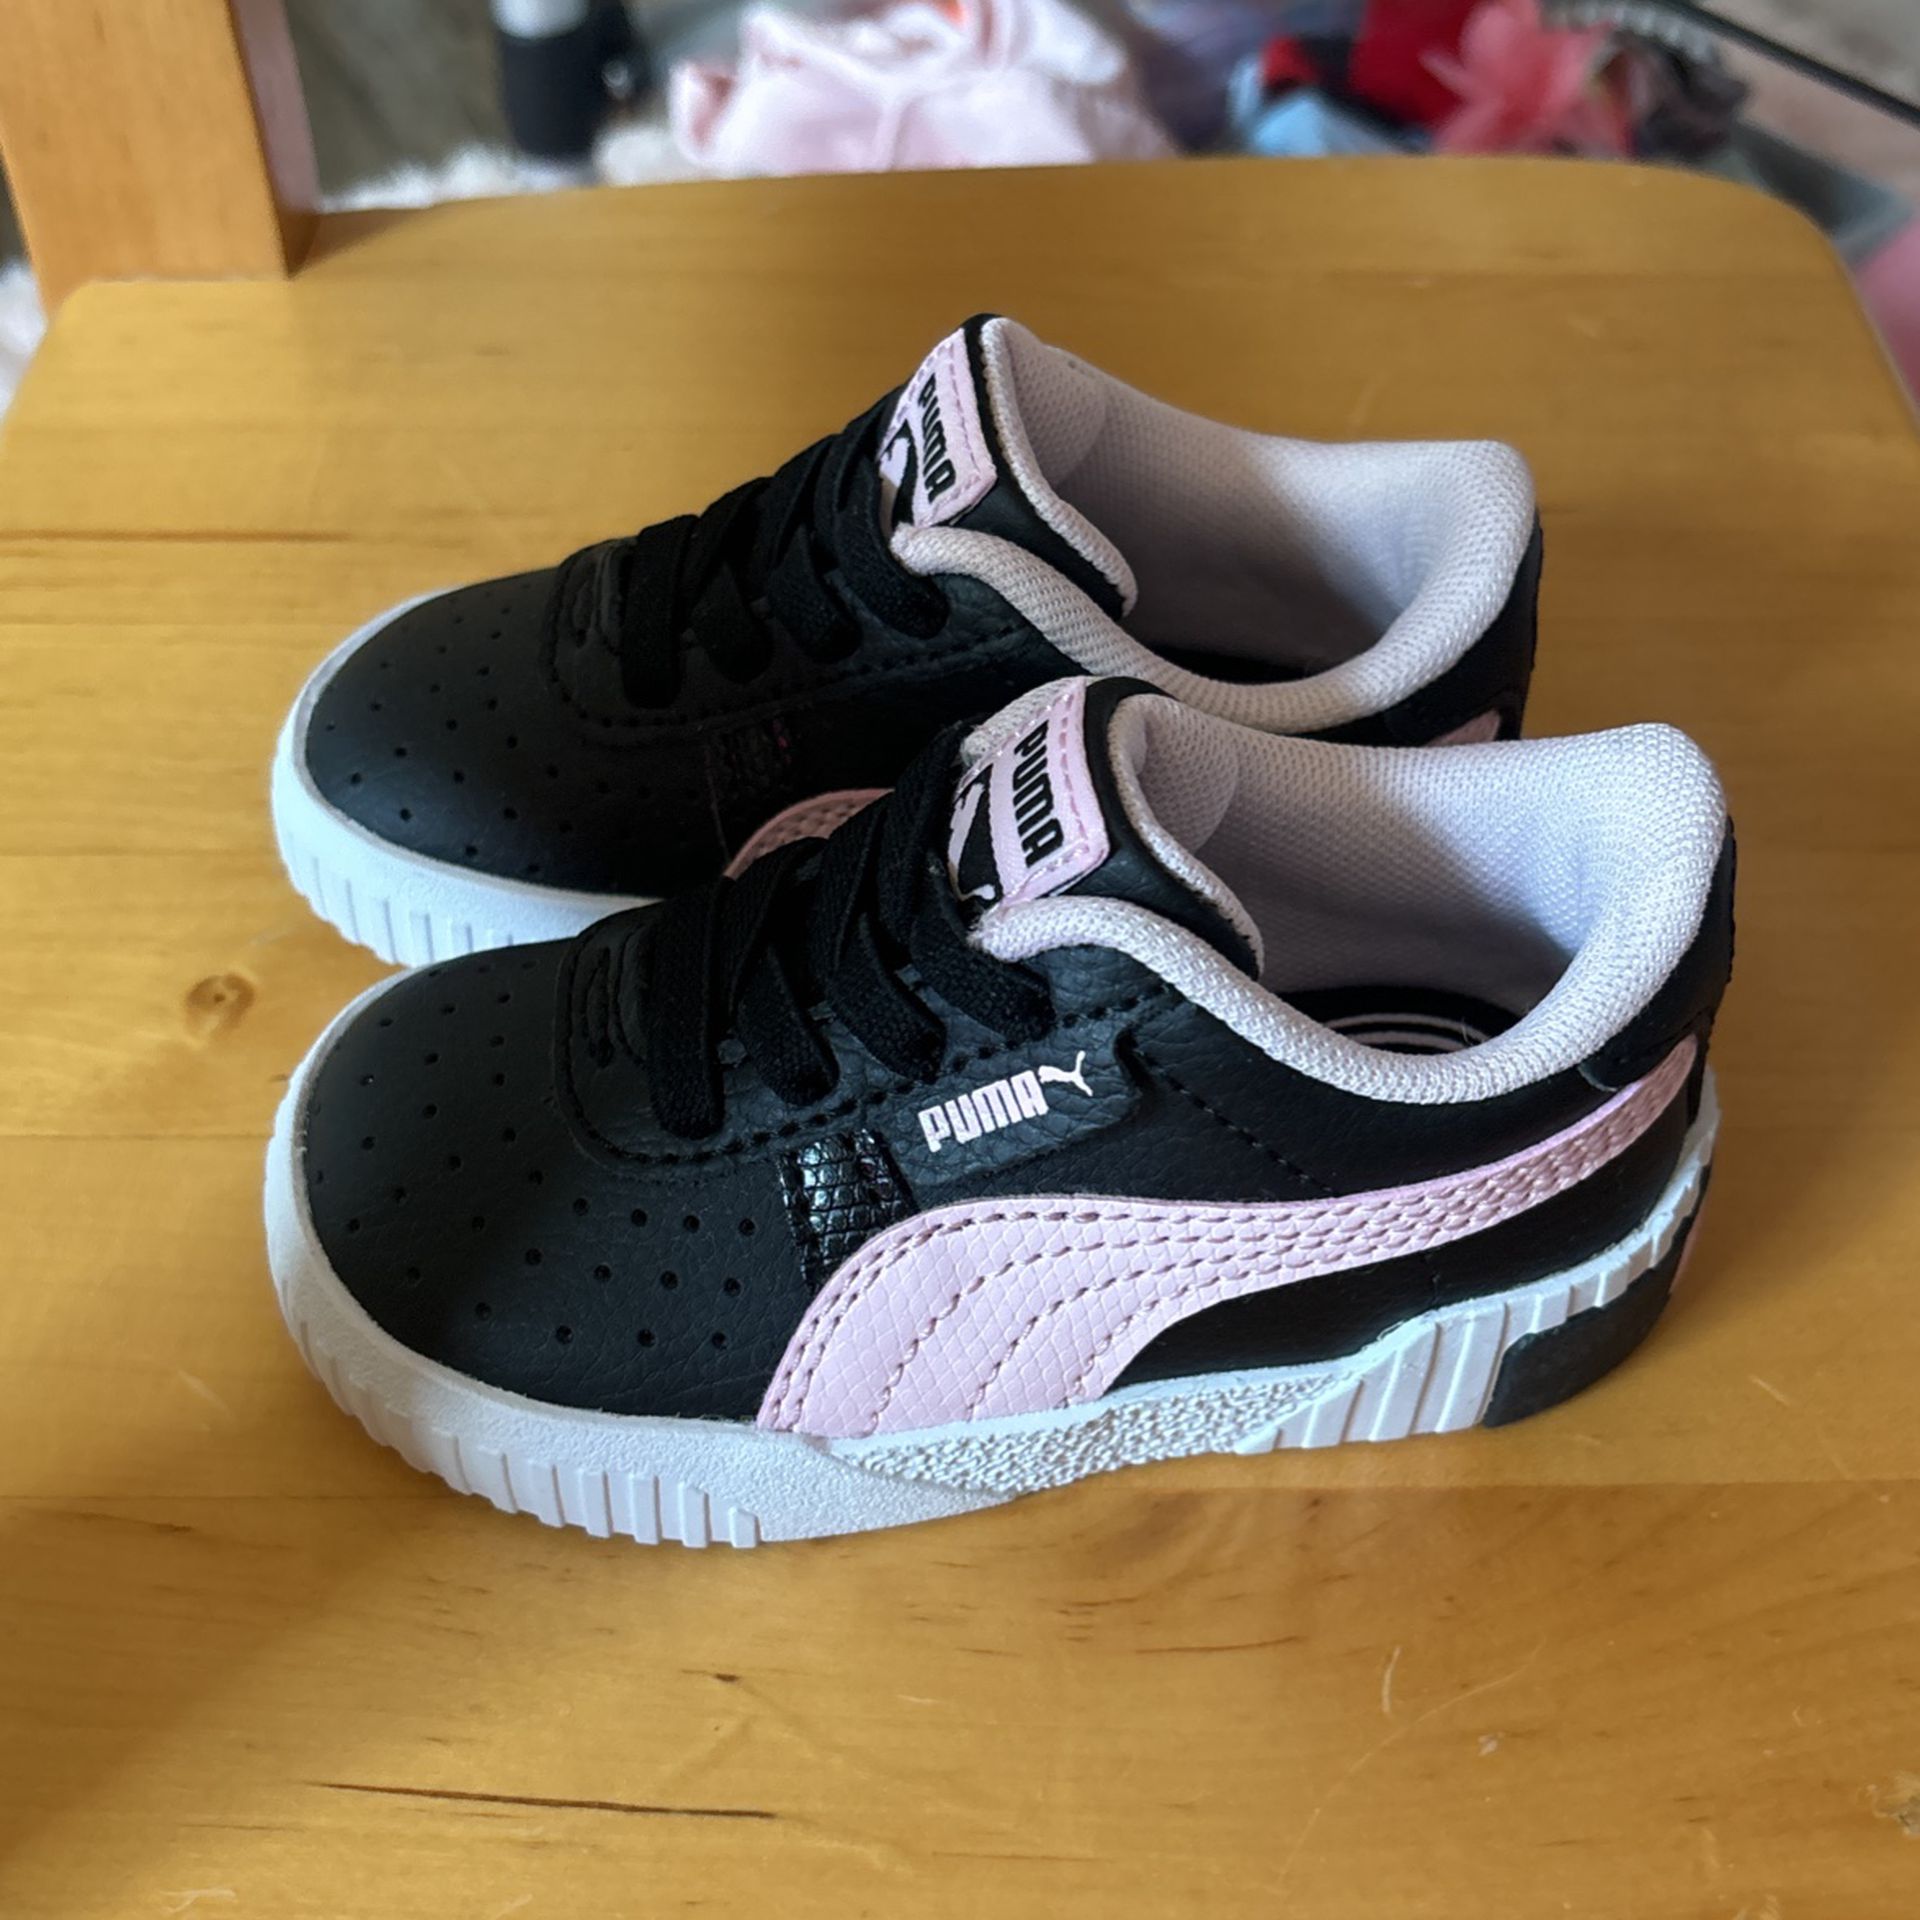 Pumas Toddlers Size 5C